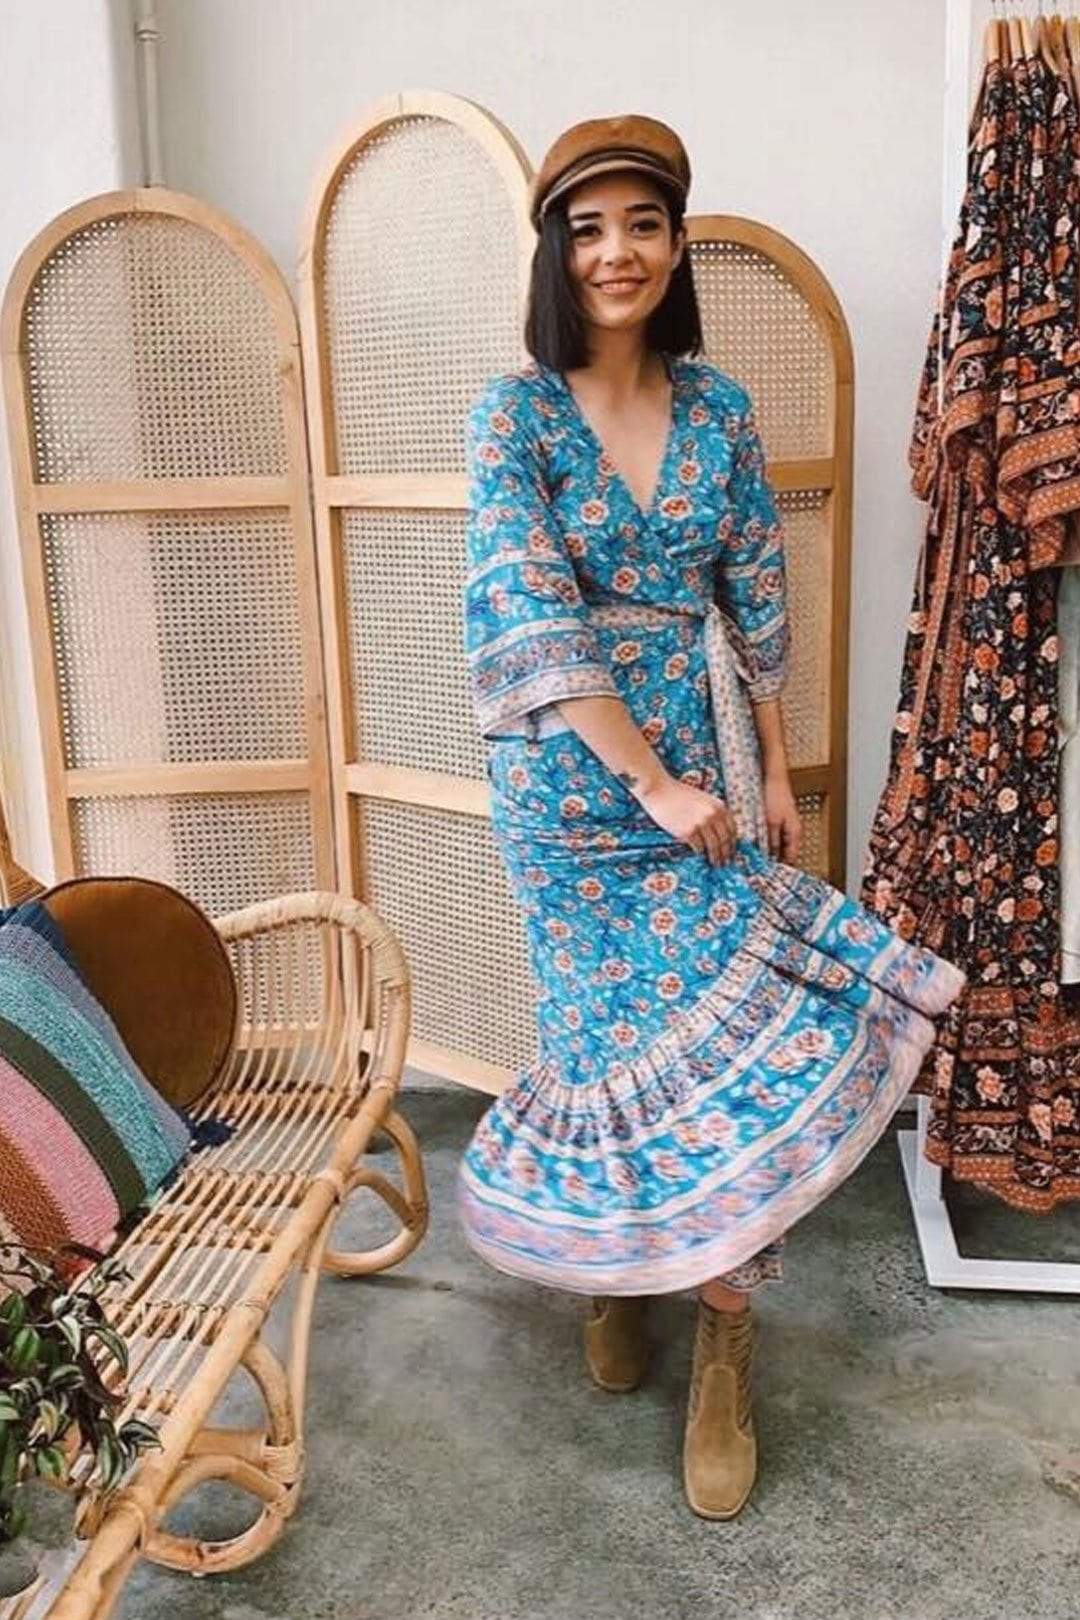 Blue Floral Three Quarter Sleeve Bohemian Dress with Belt-ChicBohoStyle